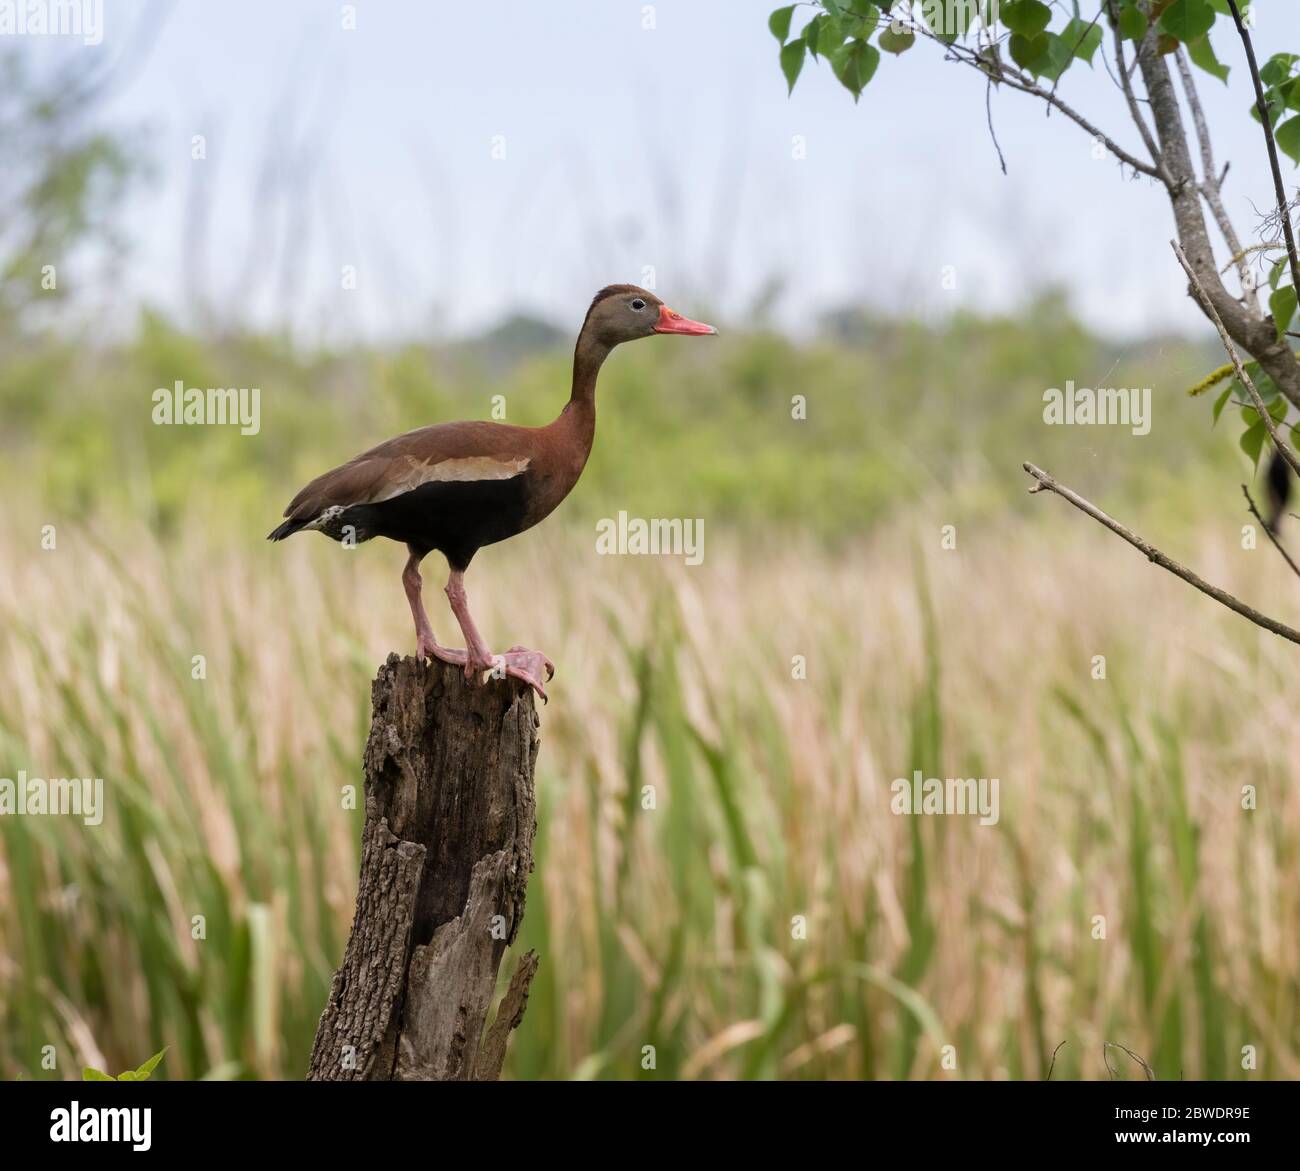 The black-bellied whistling duck (Dendrocygna autumnalis) on the tree stumb Stock Photo